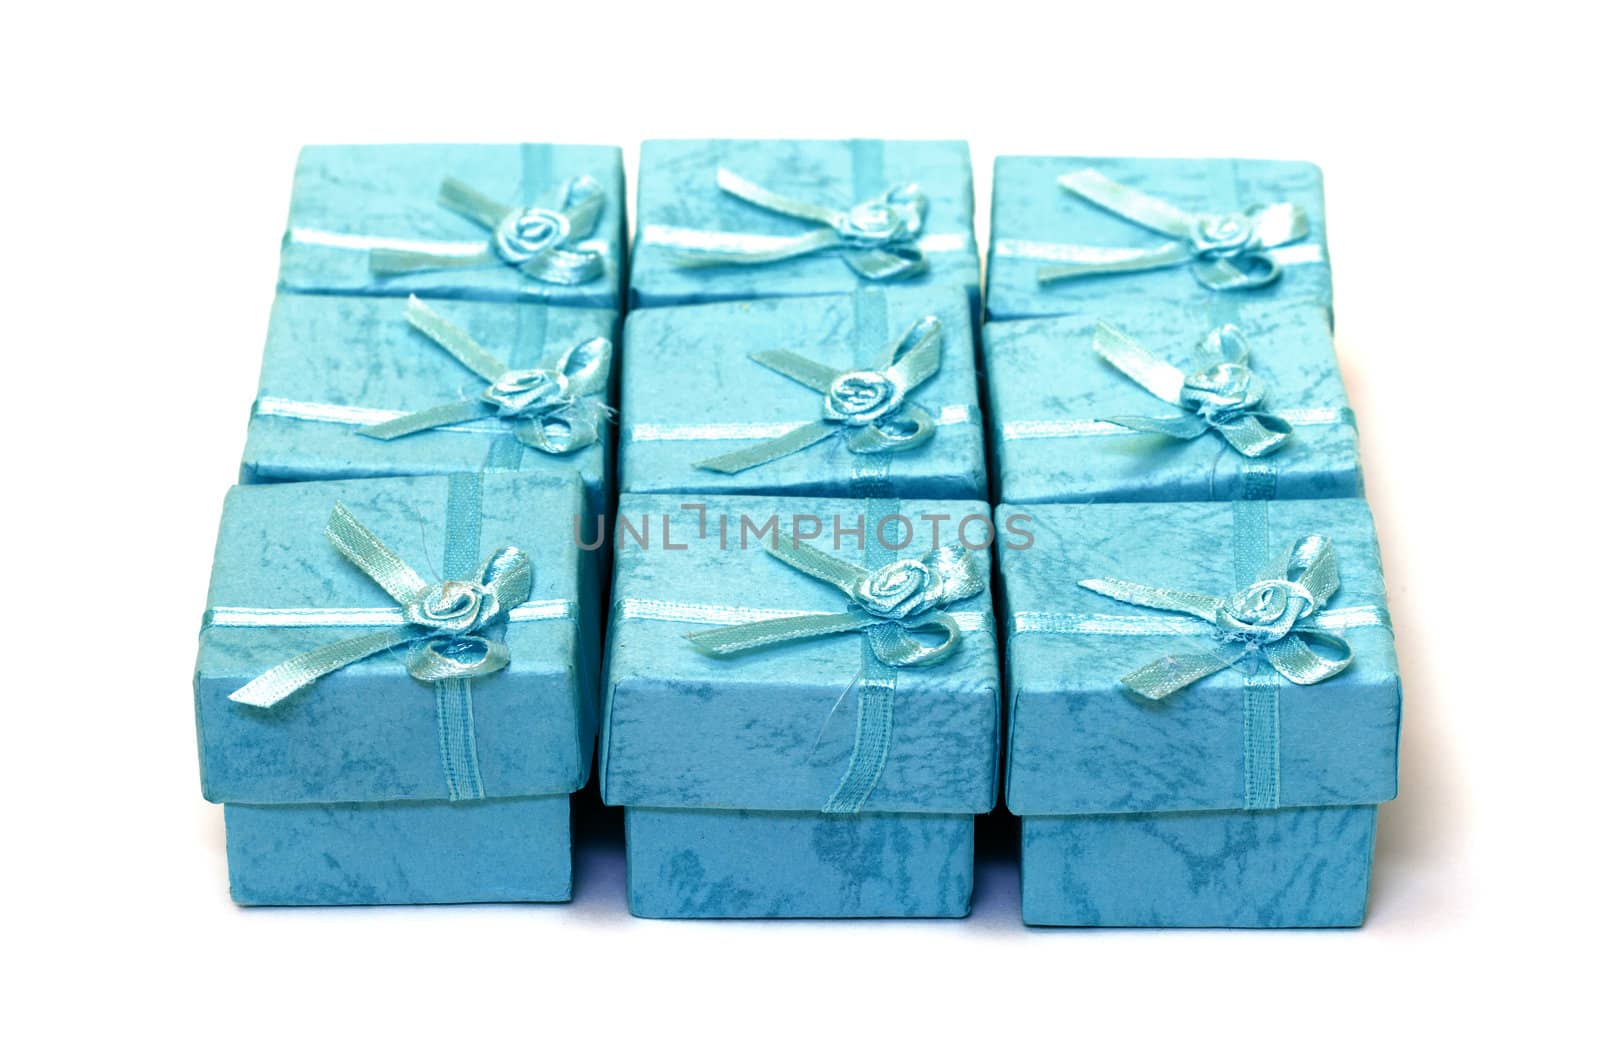 Cyan gift boxes closeup on white background